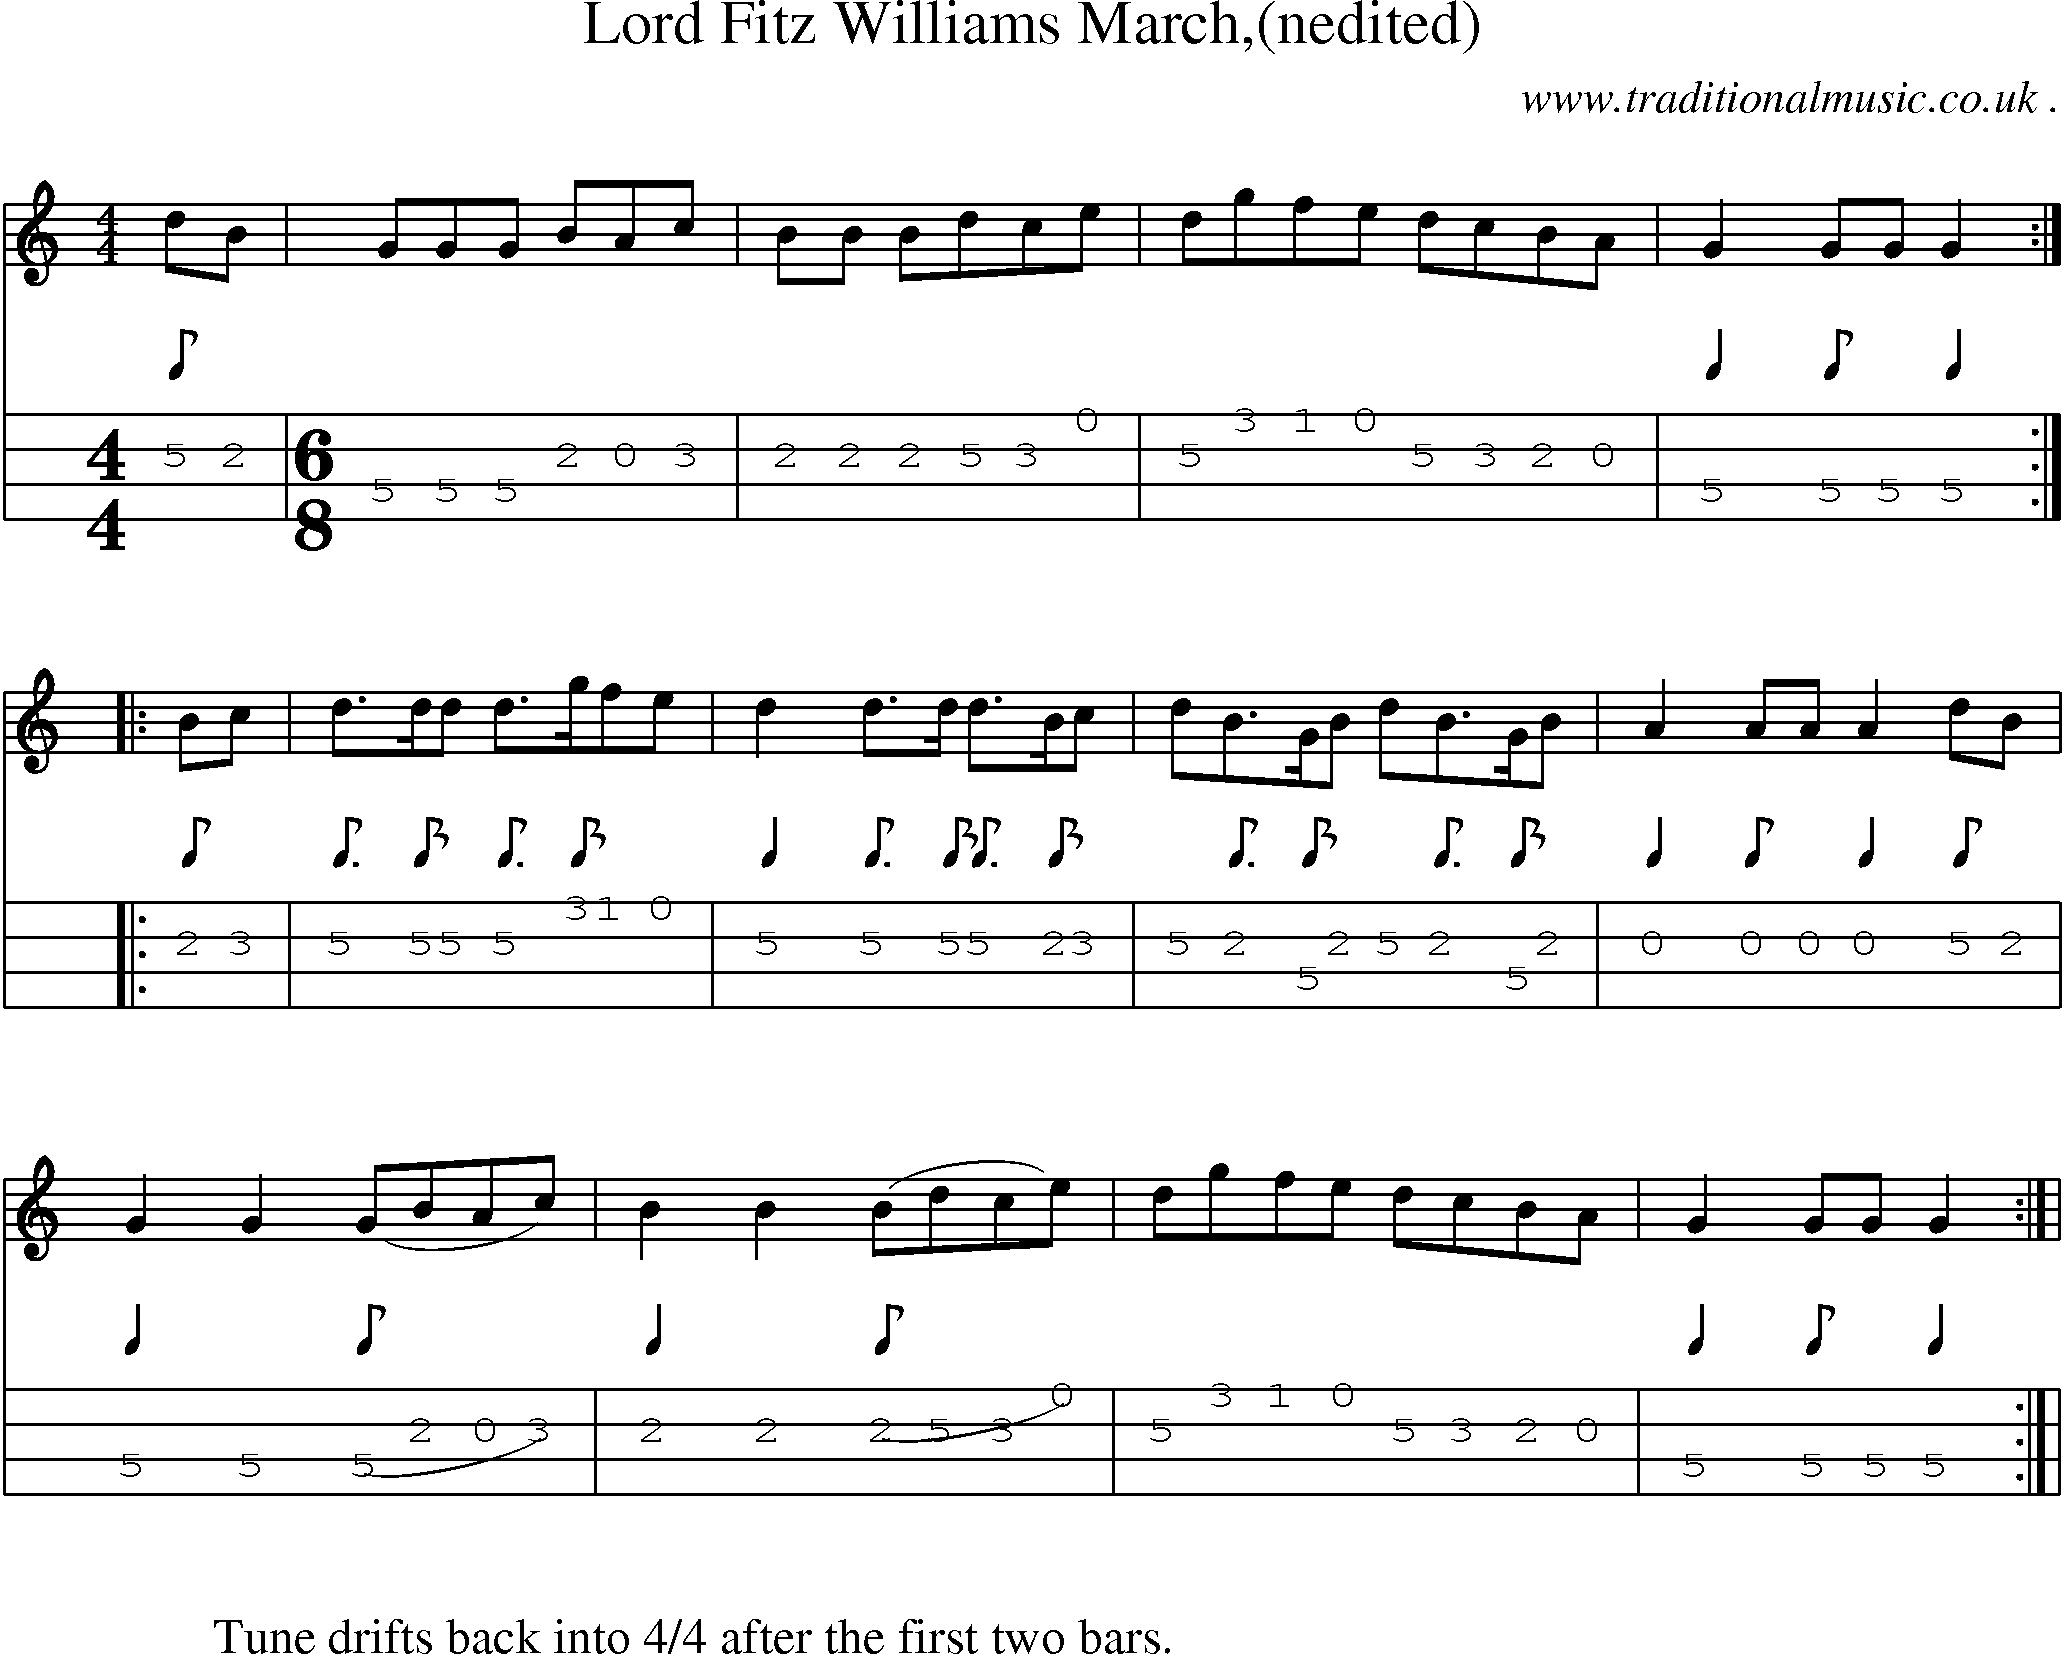 Sheet-Music and Mandolin Tabs for Lord Fitz Williams March(nedited)